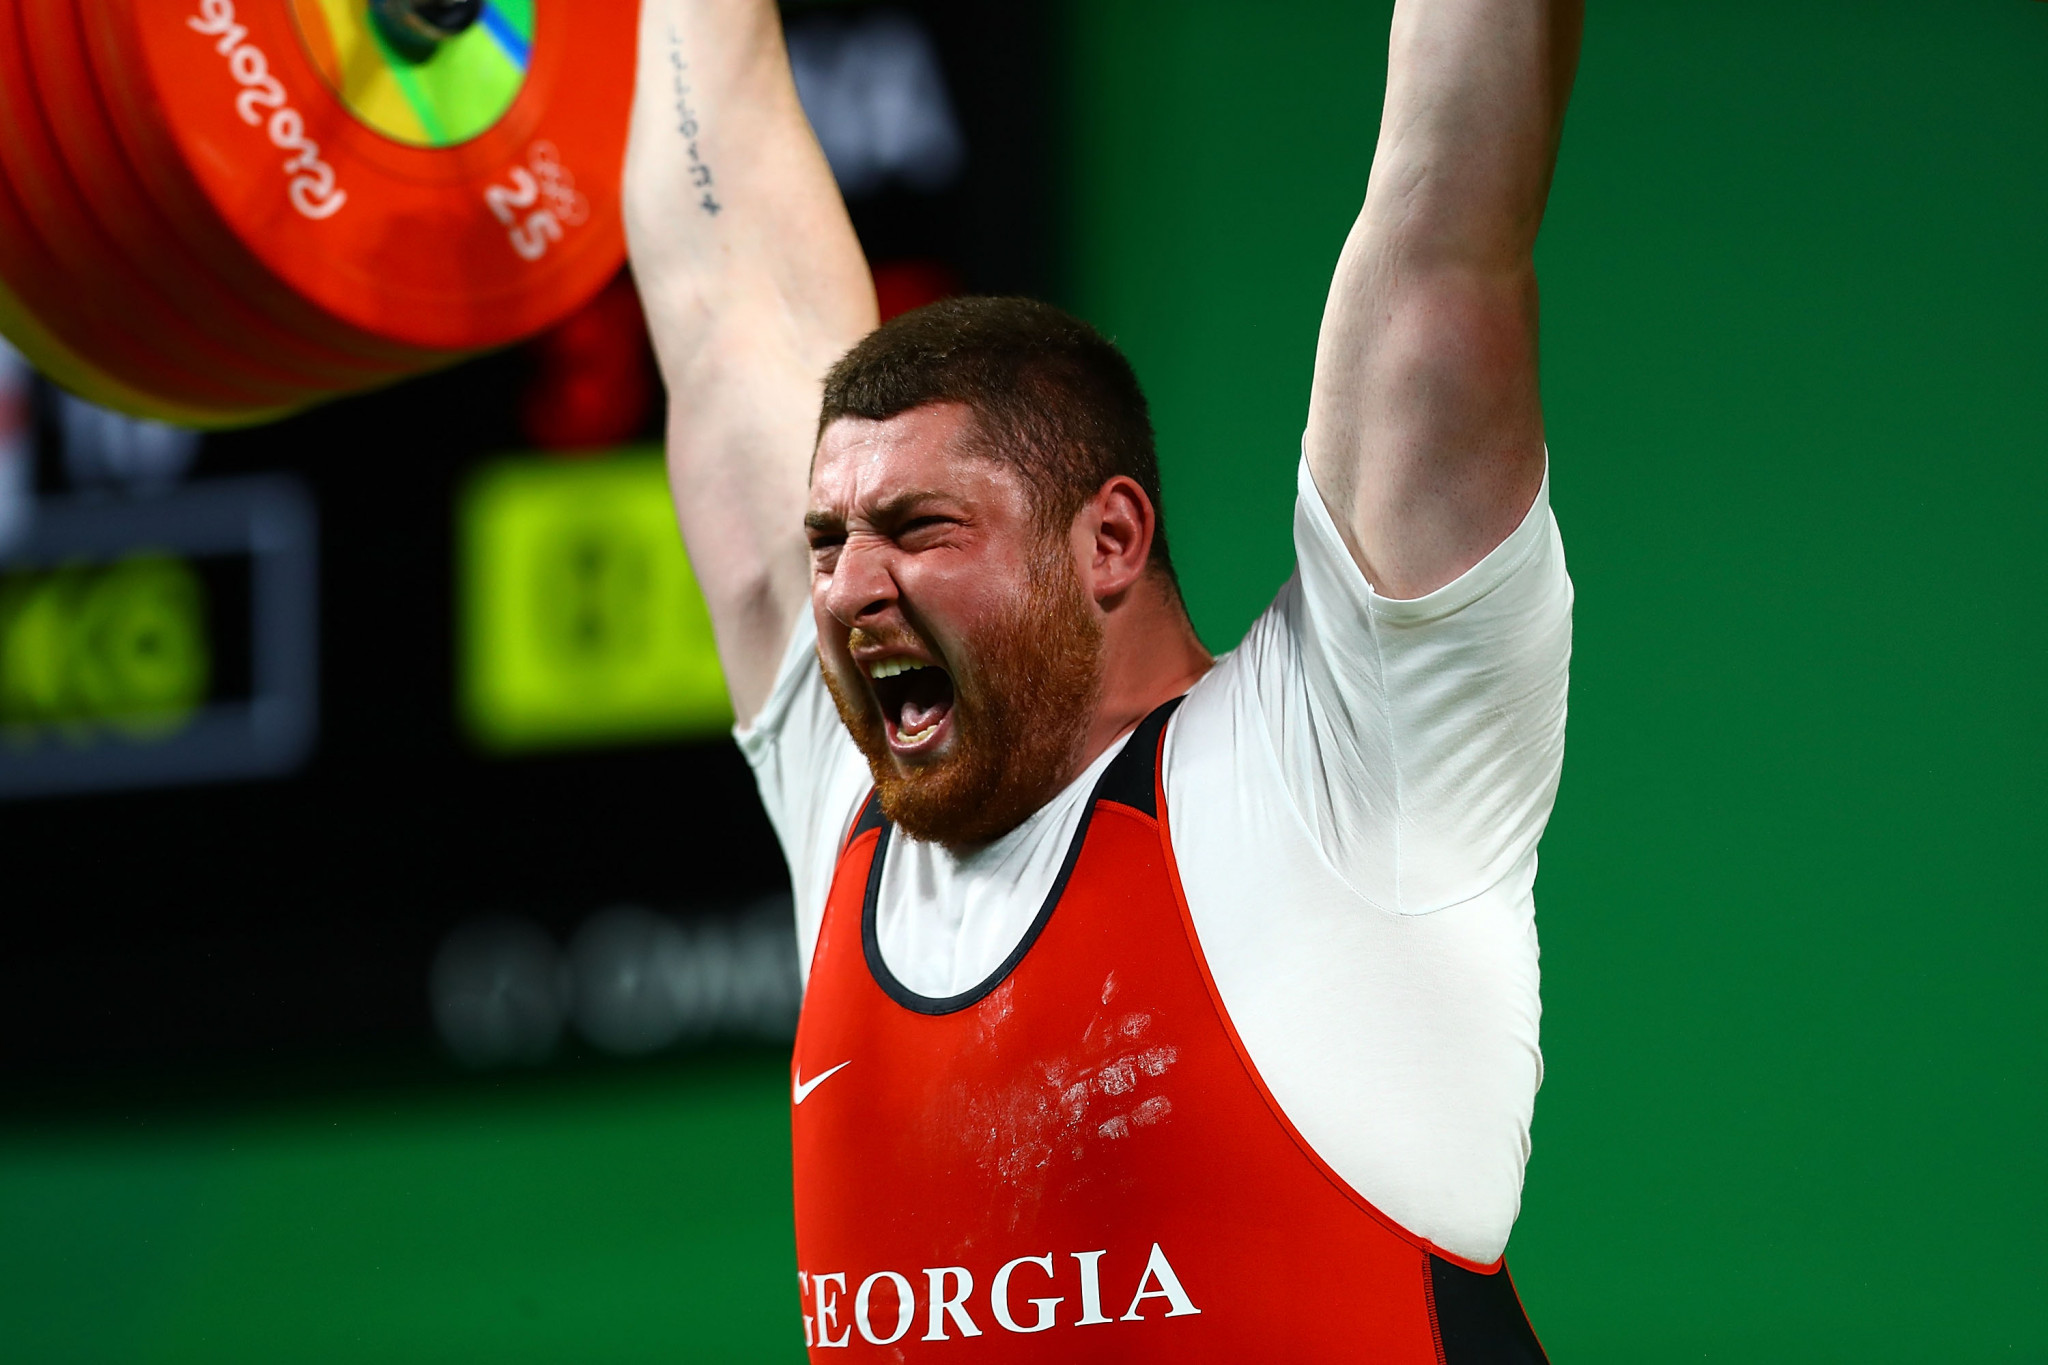 Exclusive: Georgia may replace Turkey as 2018 European Weightlifting Championships host - but no date switch